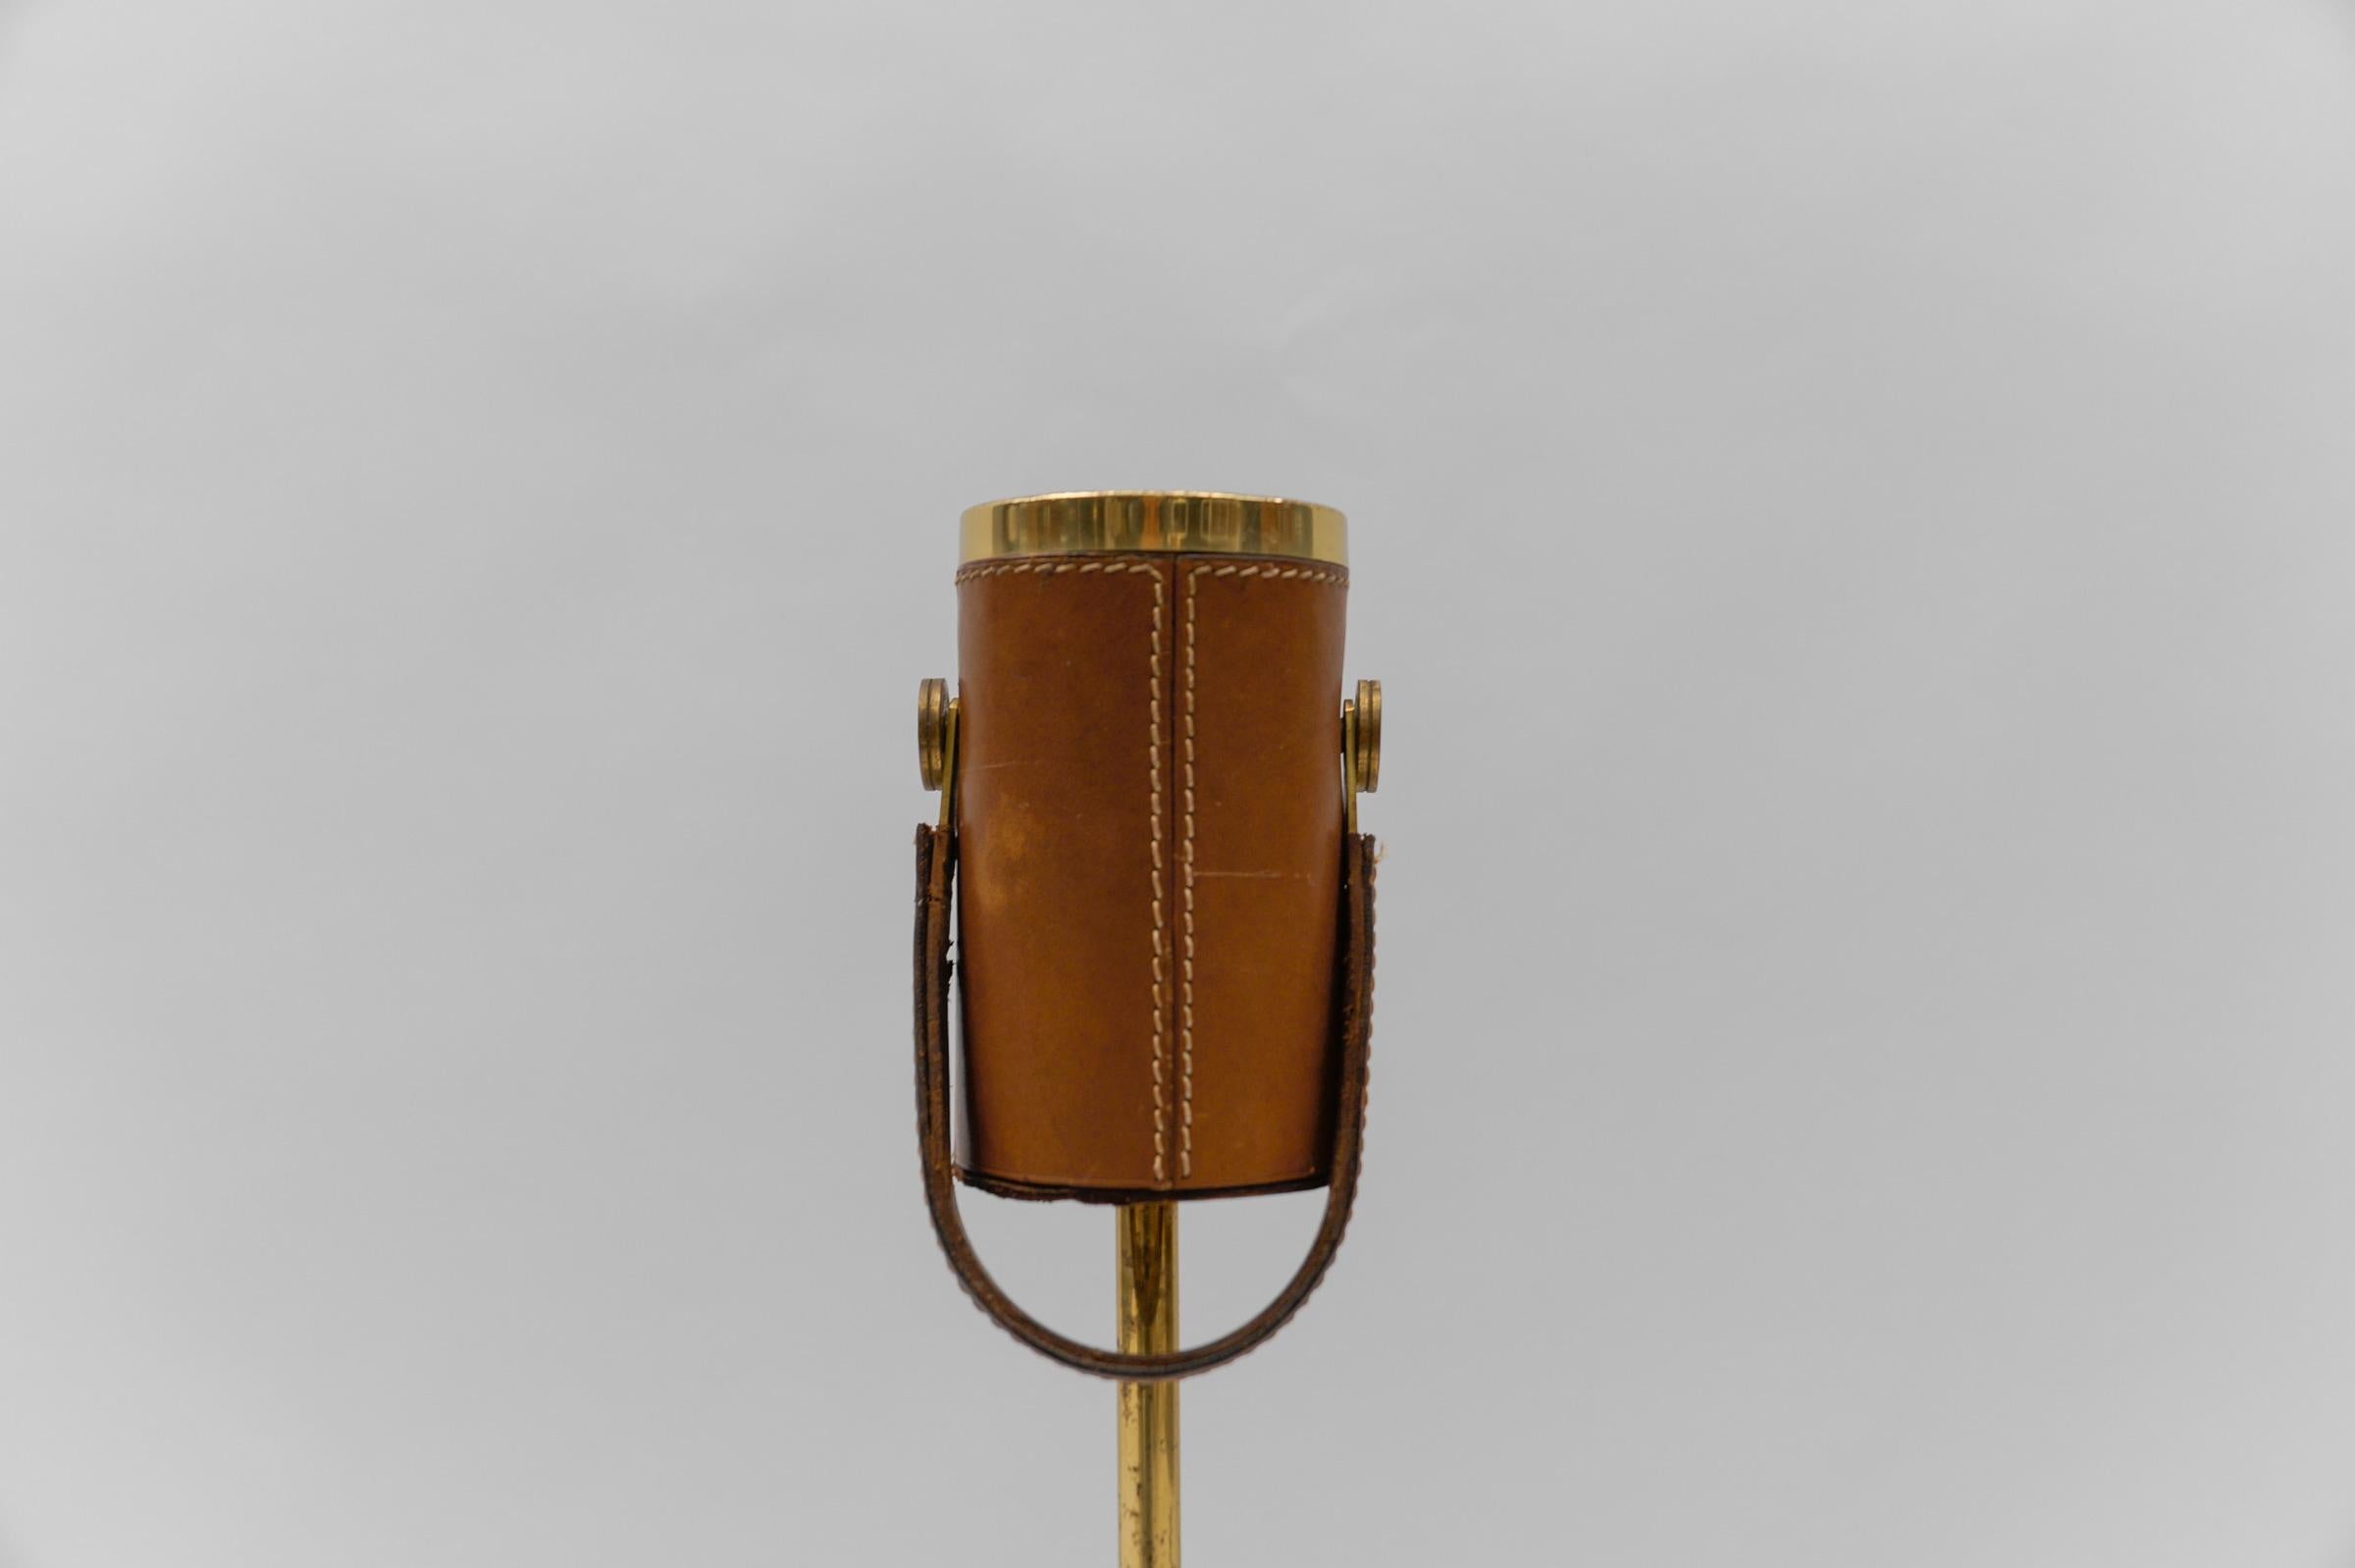 French Portable Ashtray Stand in the Manner of Jacques Adnet, Brass and Leather, 1950s For Sale